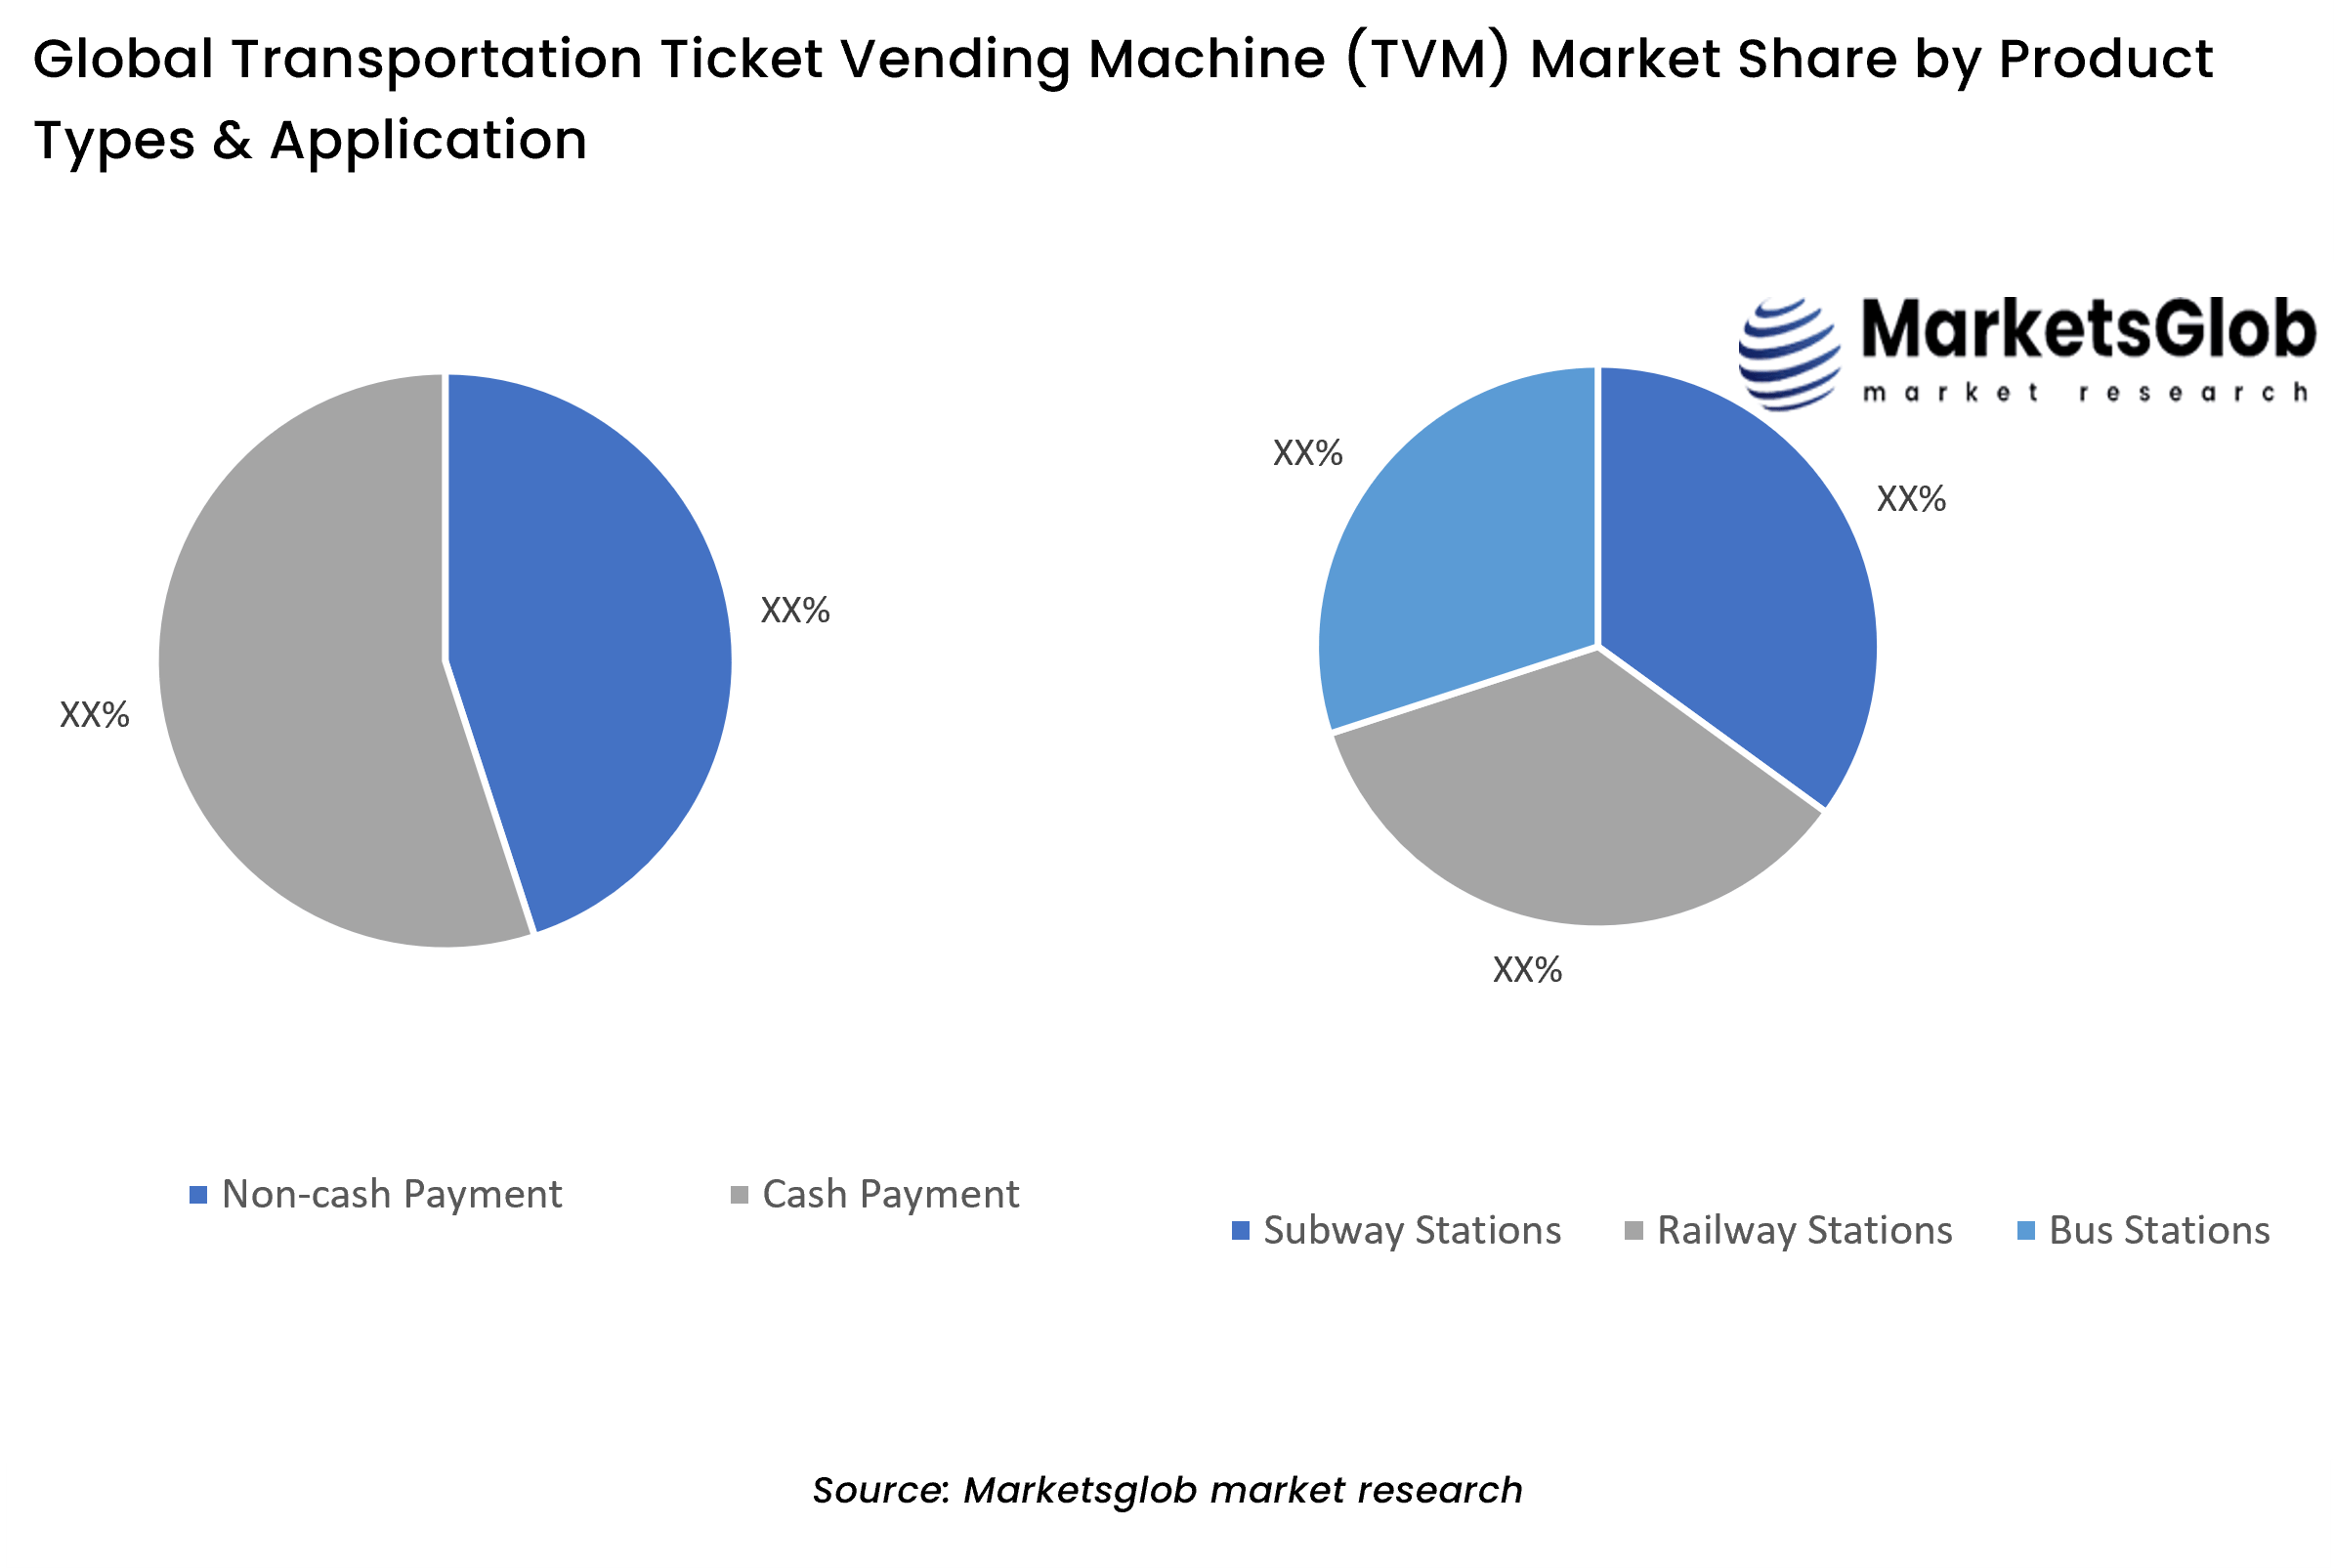 Transportation Ticket Vending Machine (TVM) Share by Product Types & Application